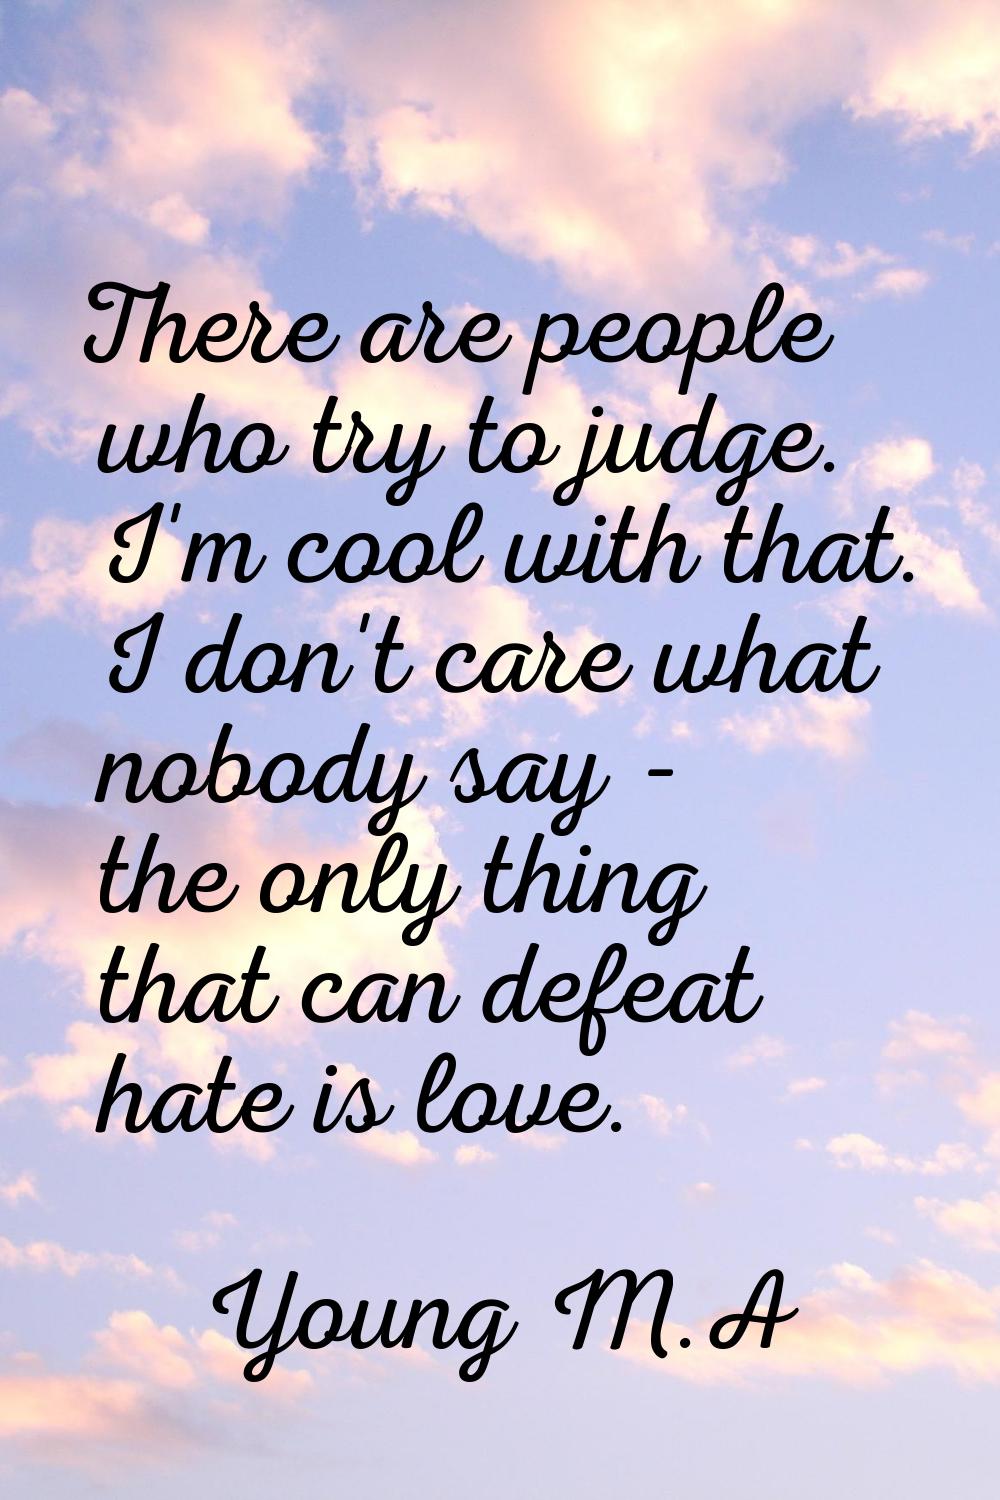 There are people who try to judge. I'm cool with that. I don't care what nobody say - the only thin